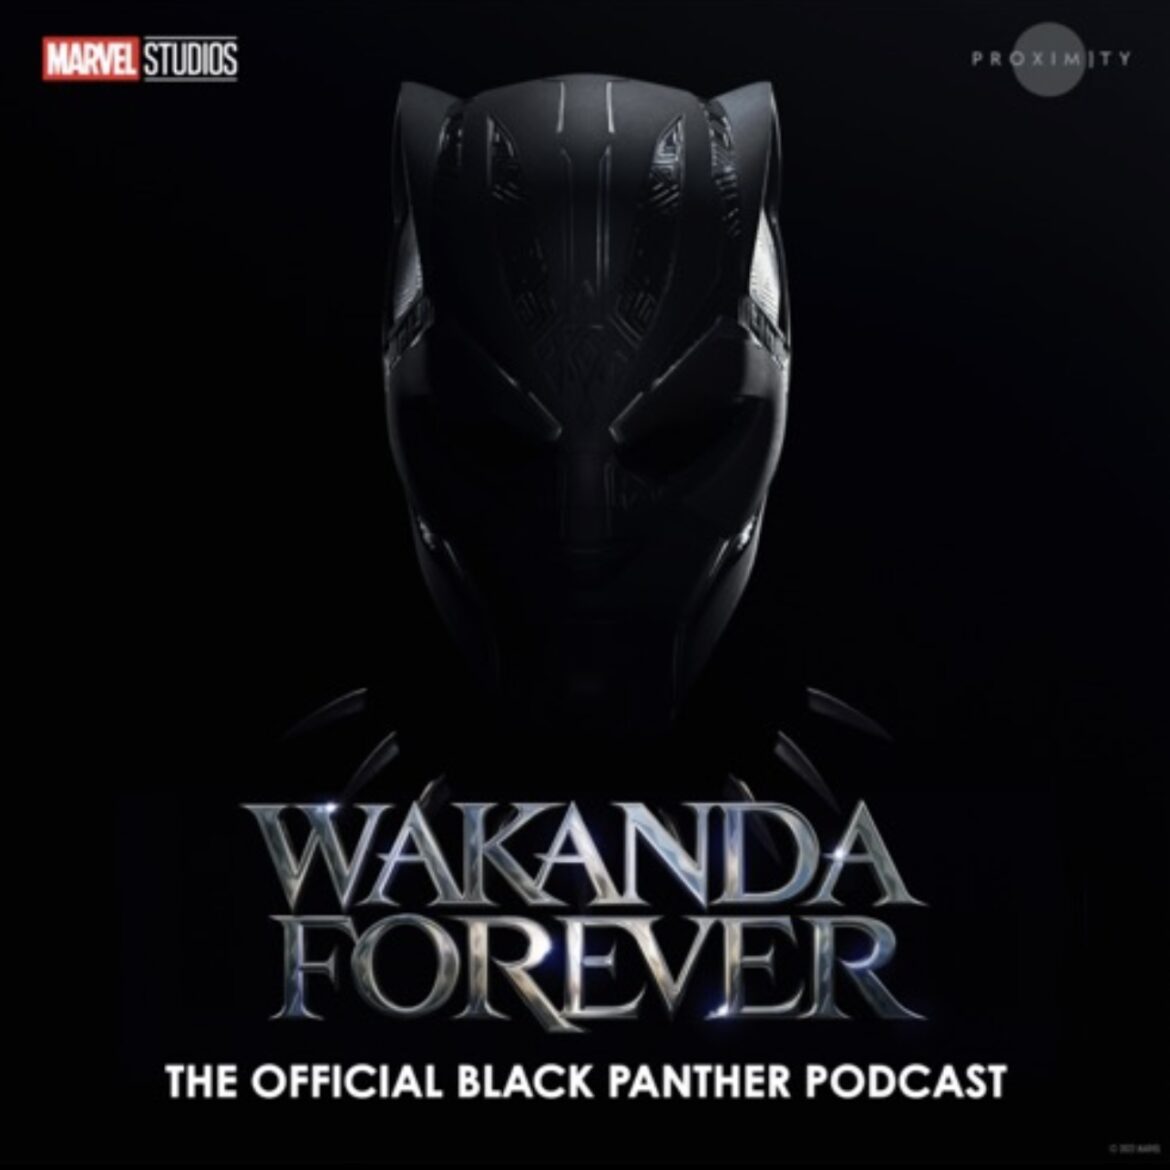 Wakanda Forever Official Black Panther Podcast Debuts This Thursday, Nov. 3rd 